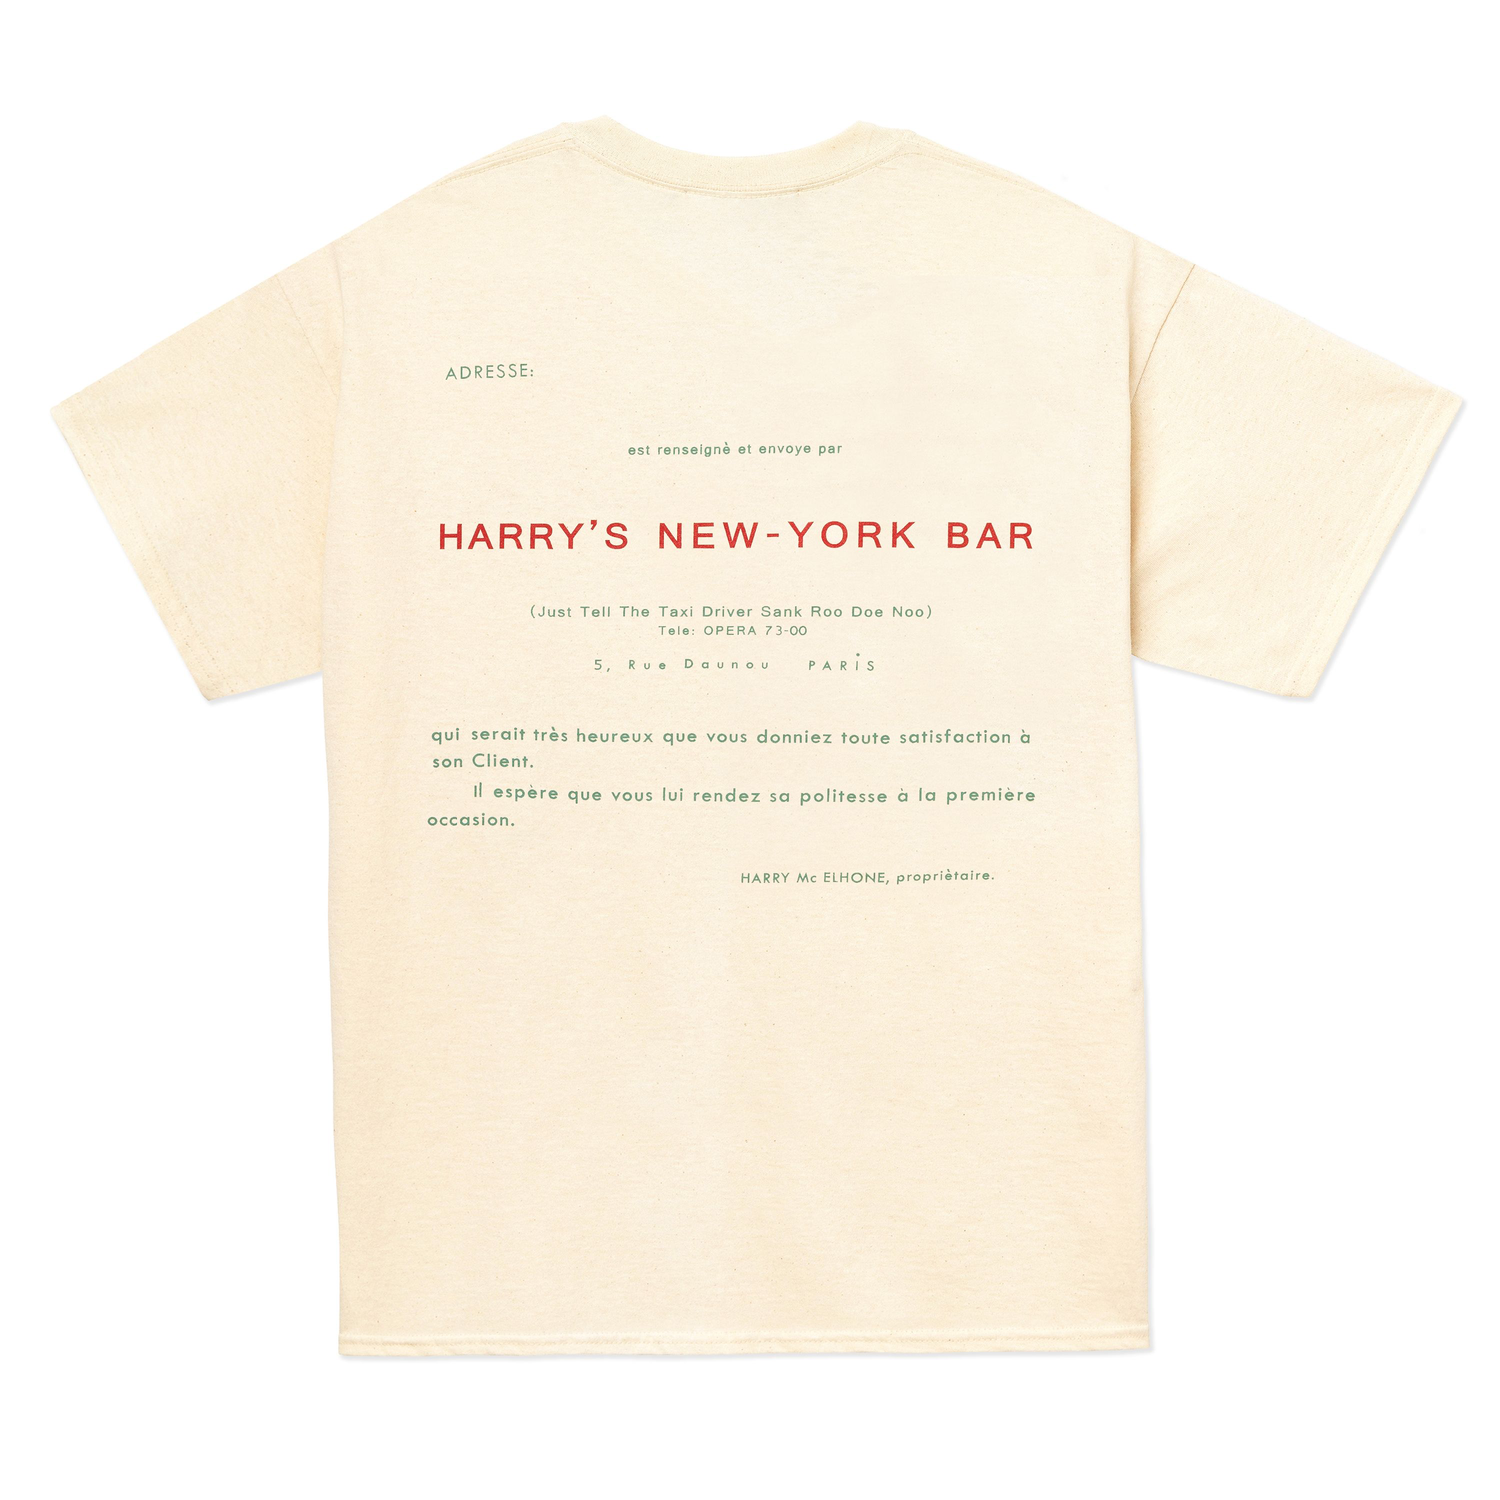 Ivory short sleeve tee printed with Harry's address on the back.